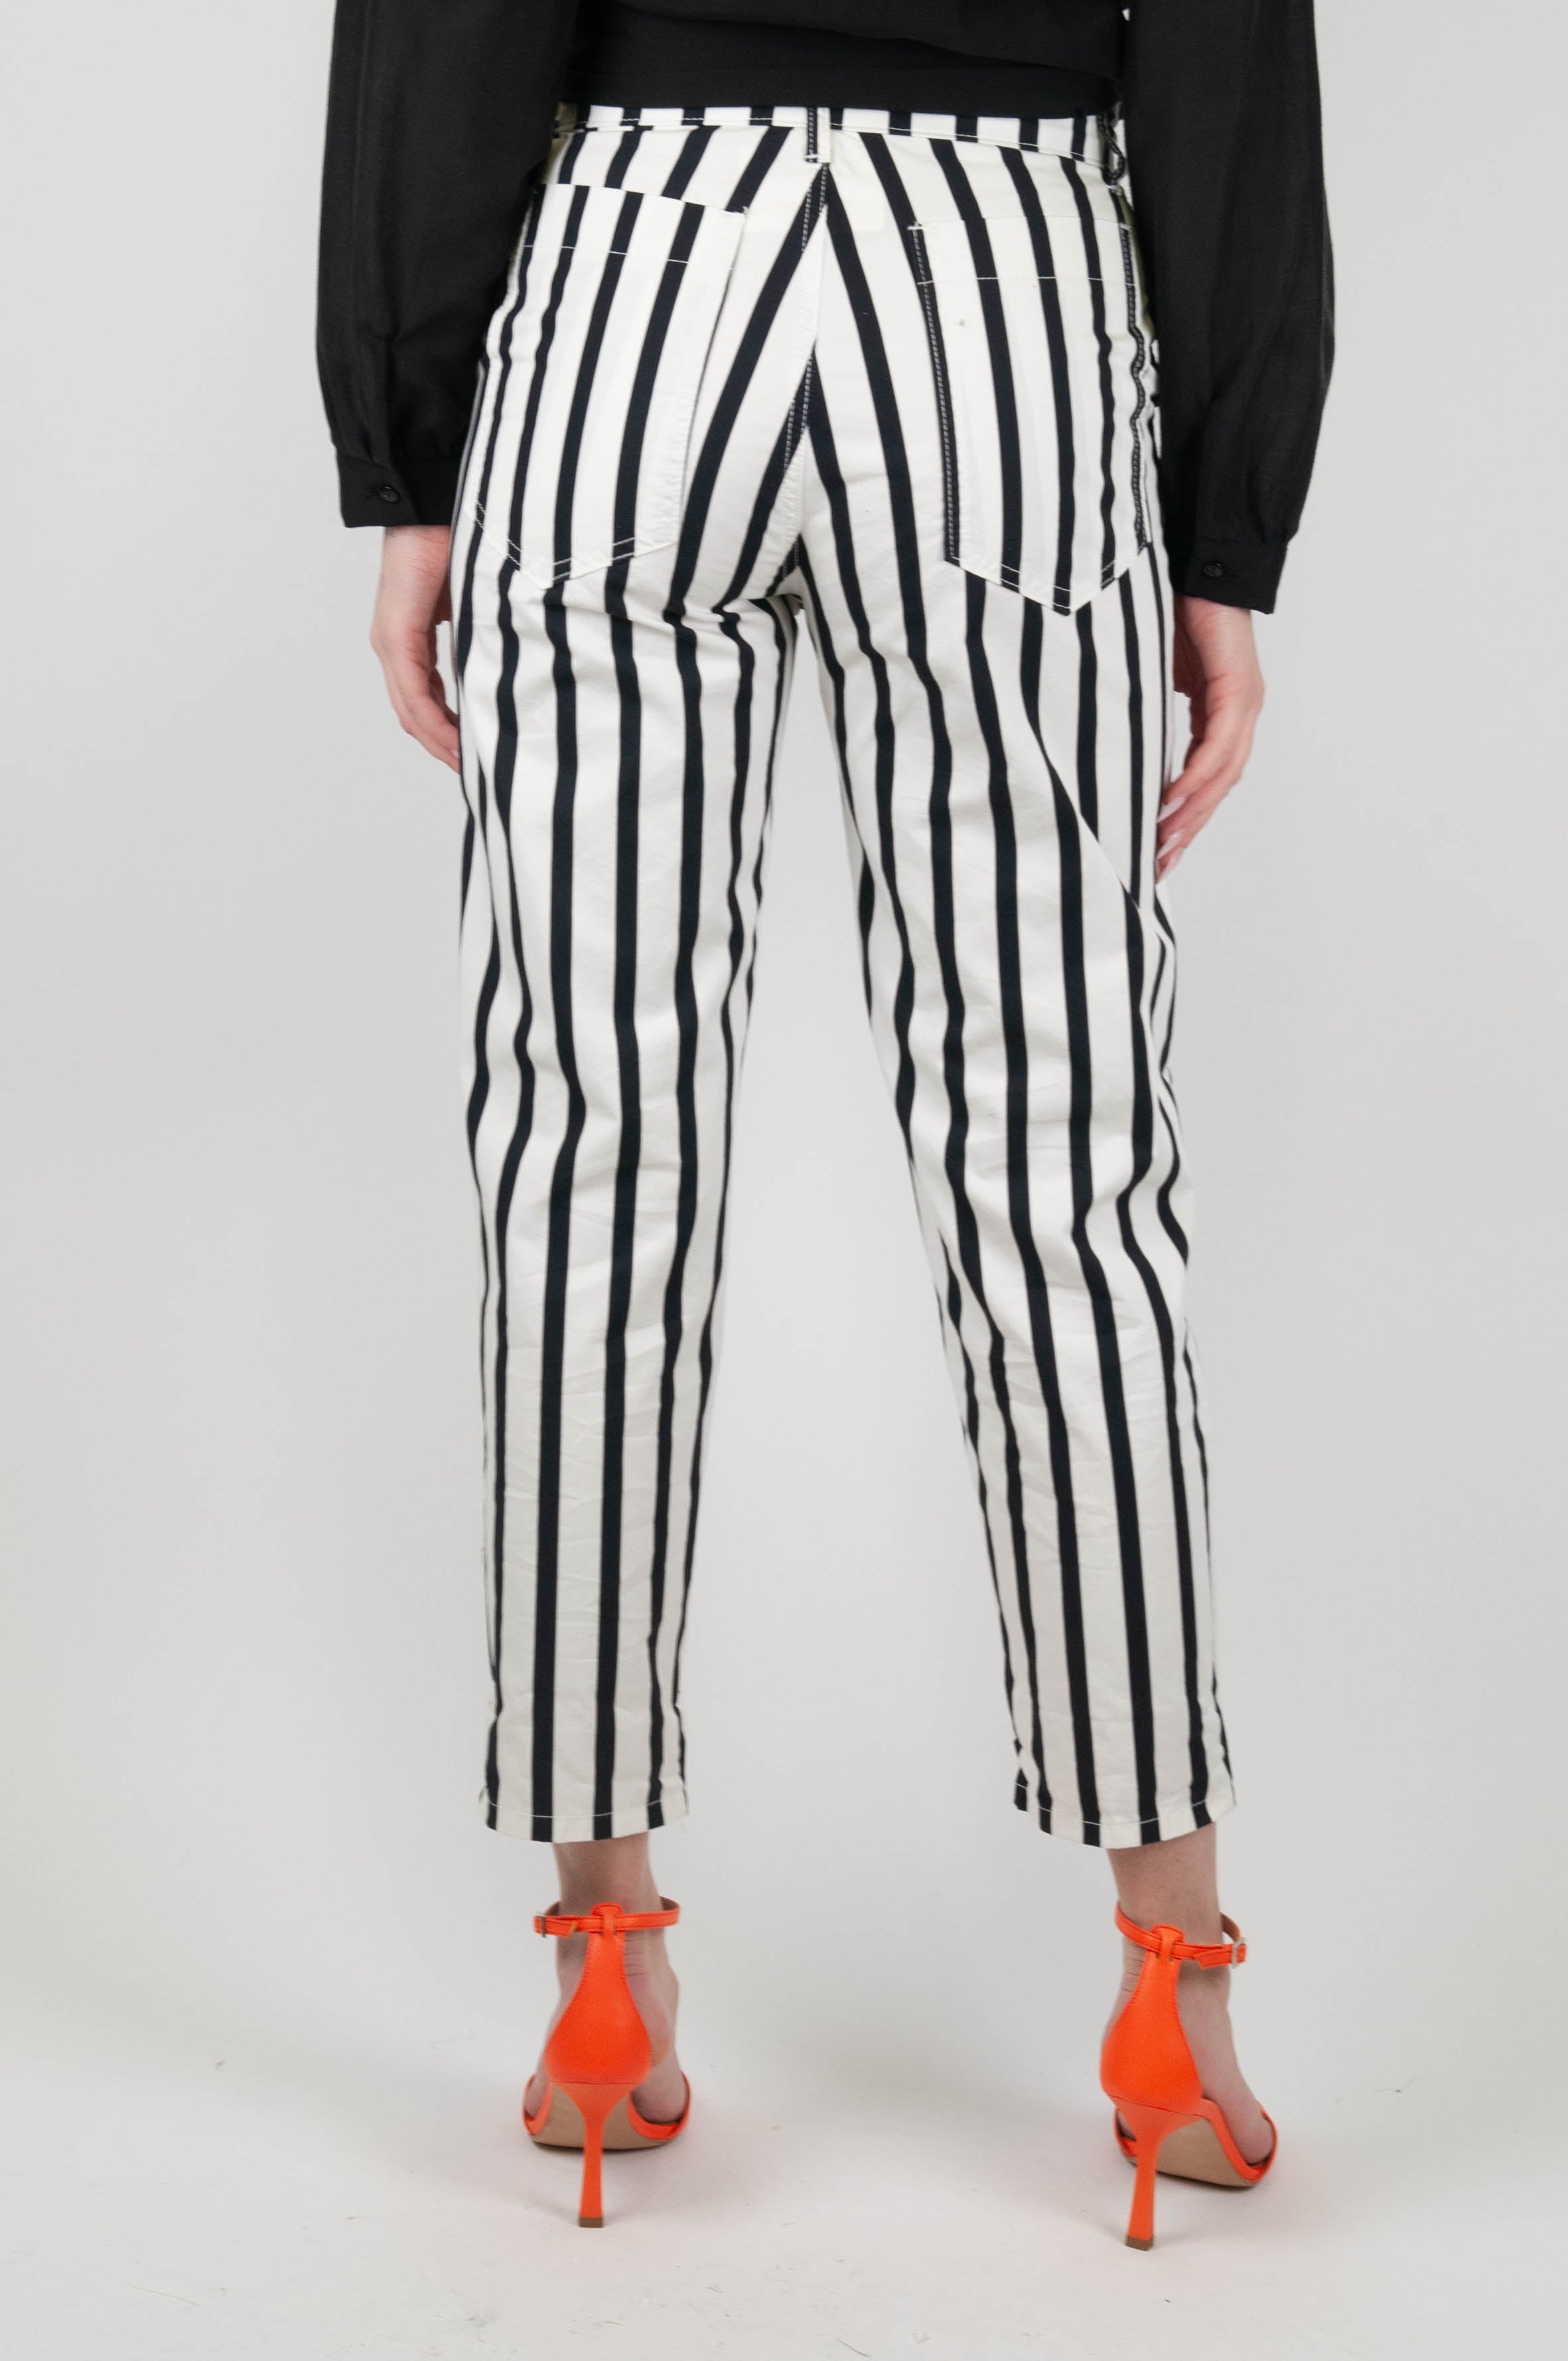 Tension in - Slim striped patterned trousers